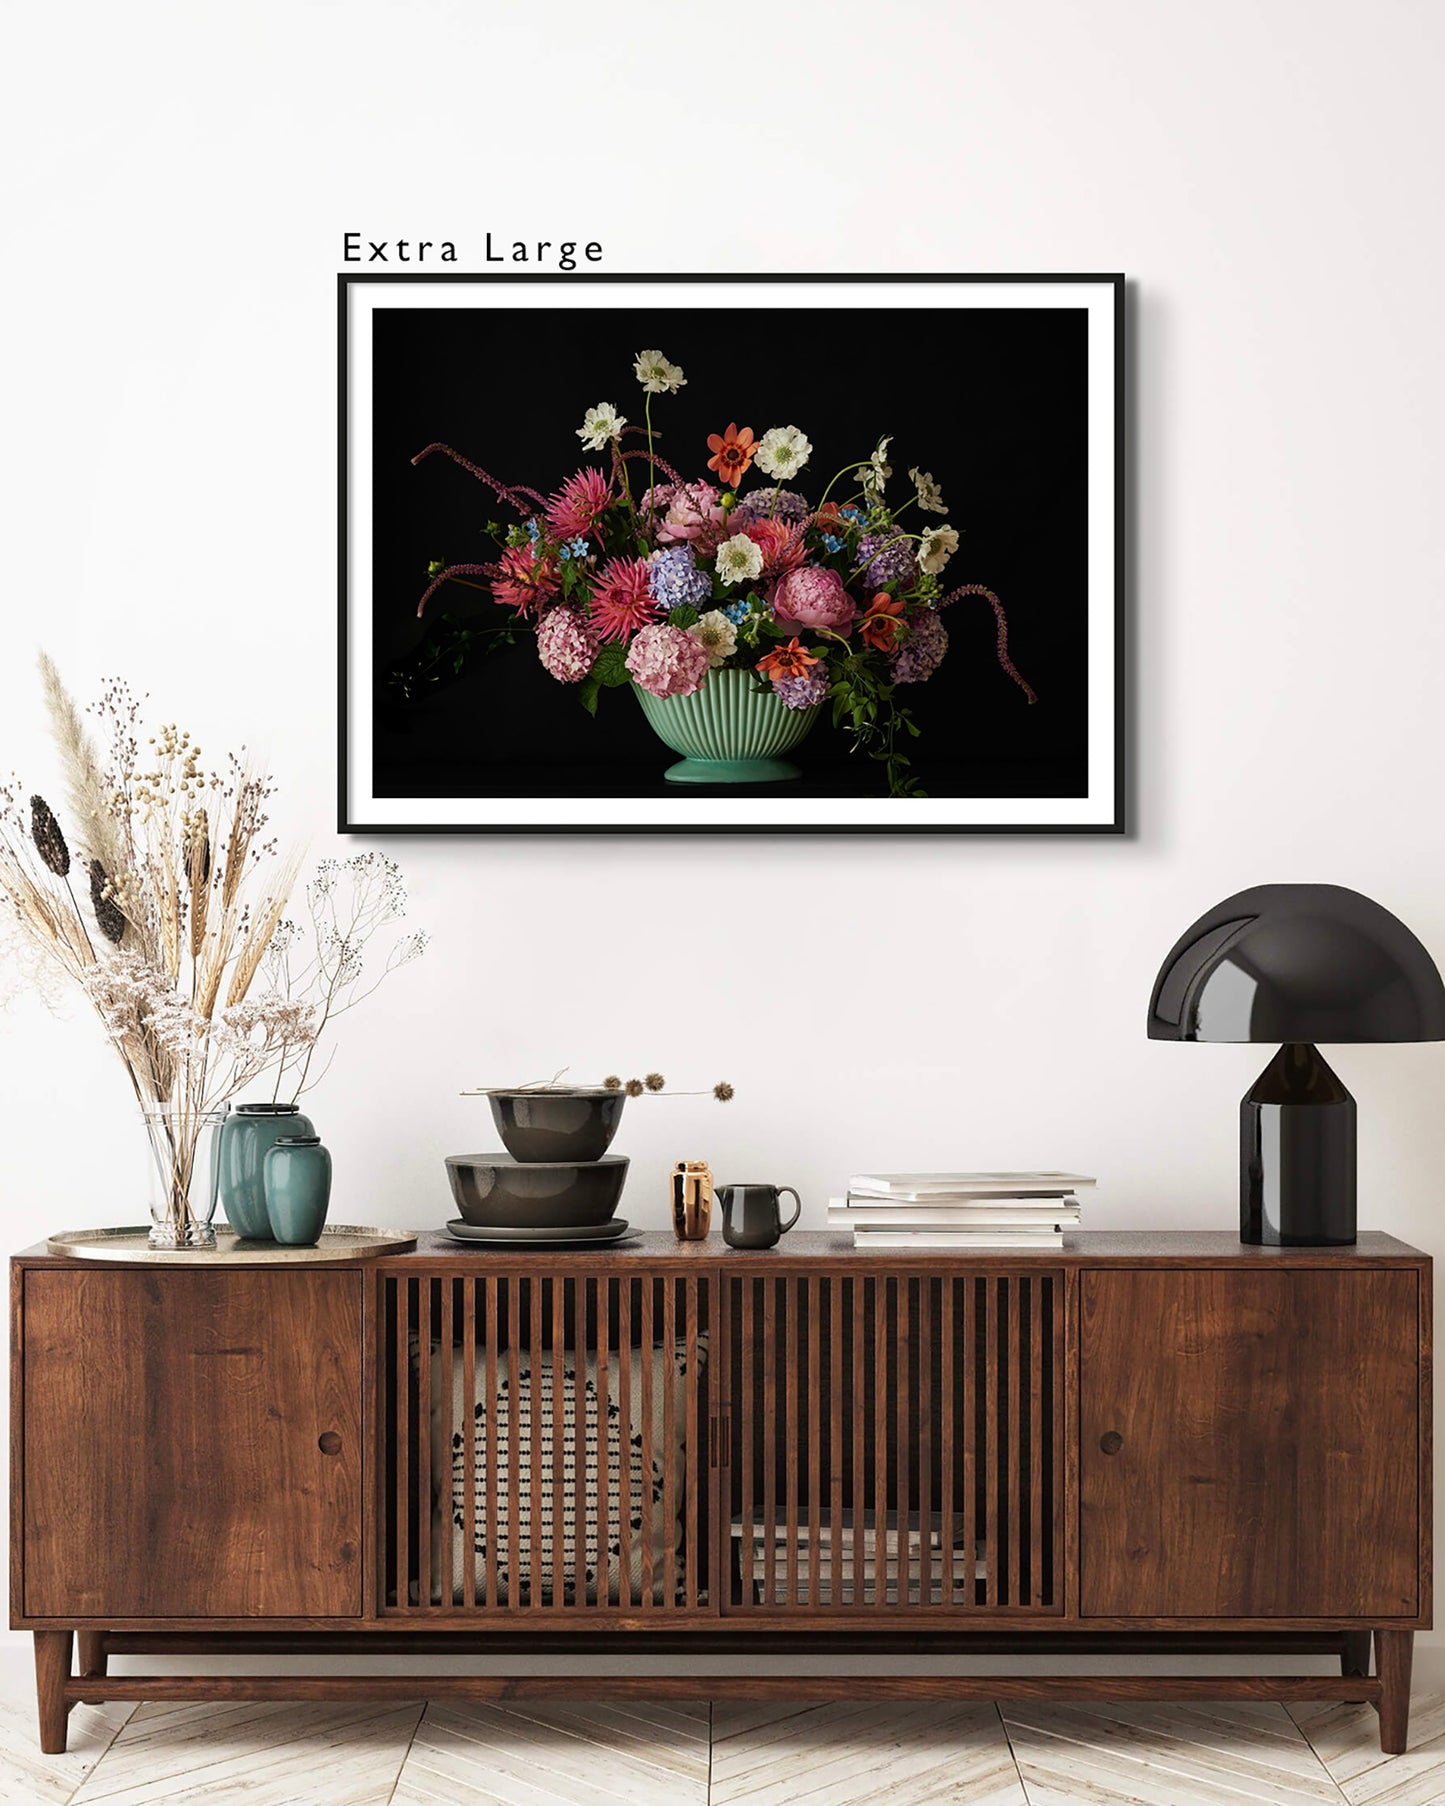 Limited Edition 'BETSY' Framed Photographic Print Shown in Extra Large Size, Displayed In A Dining Room.